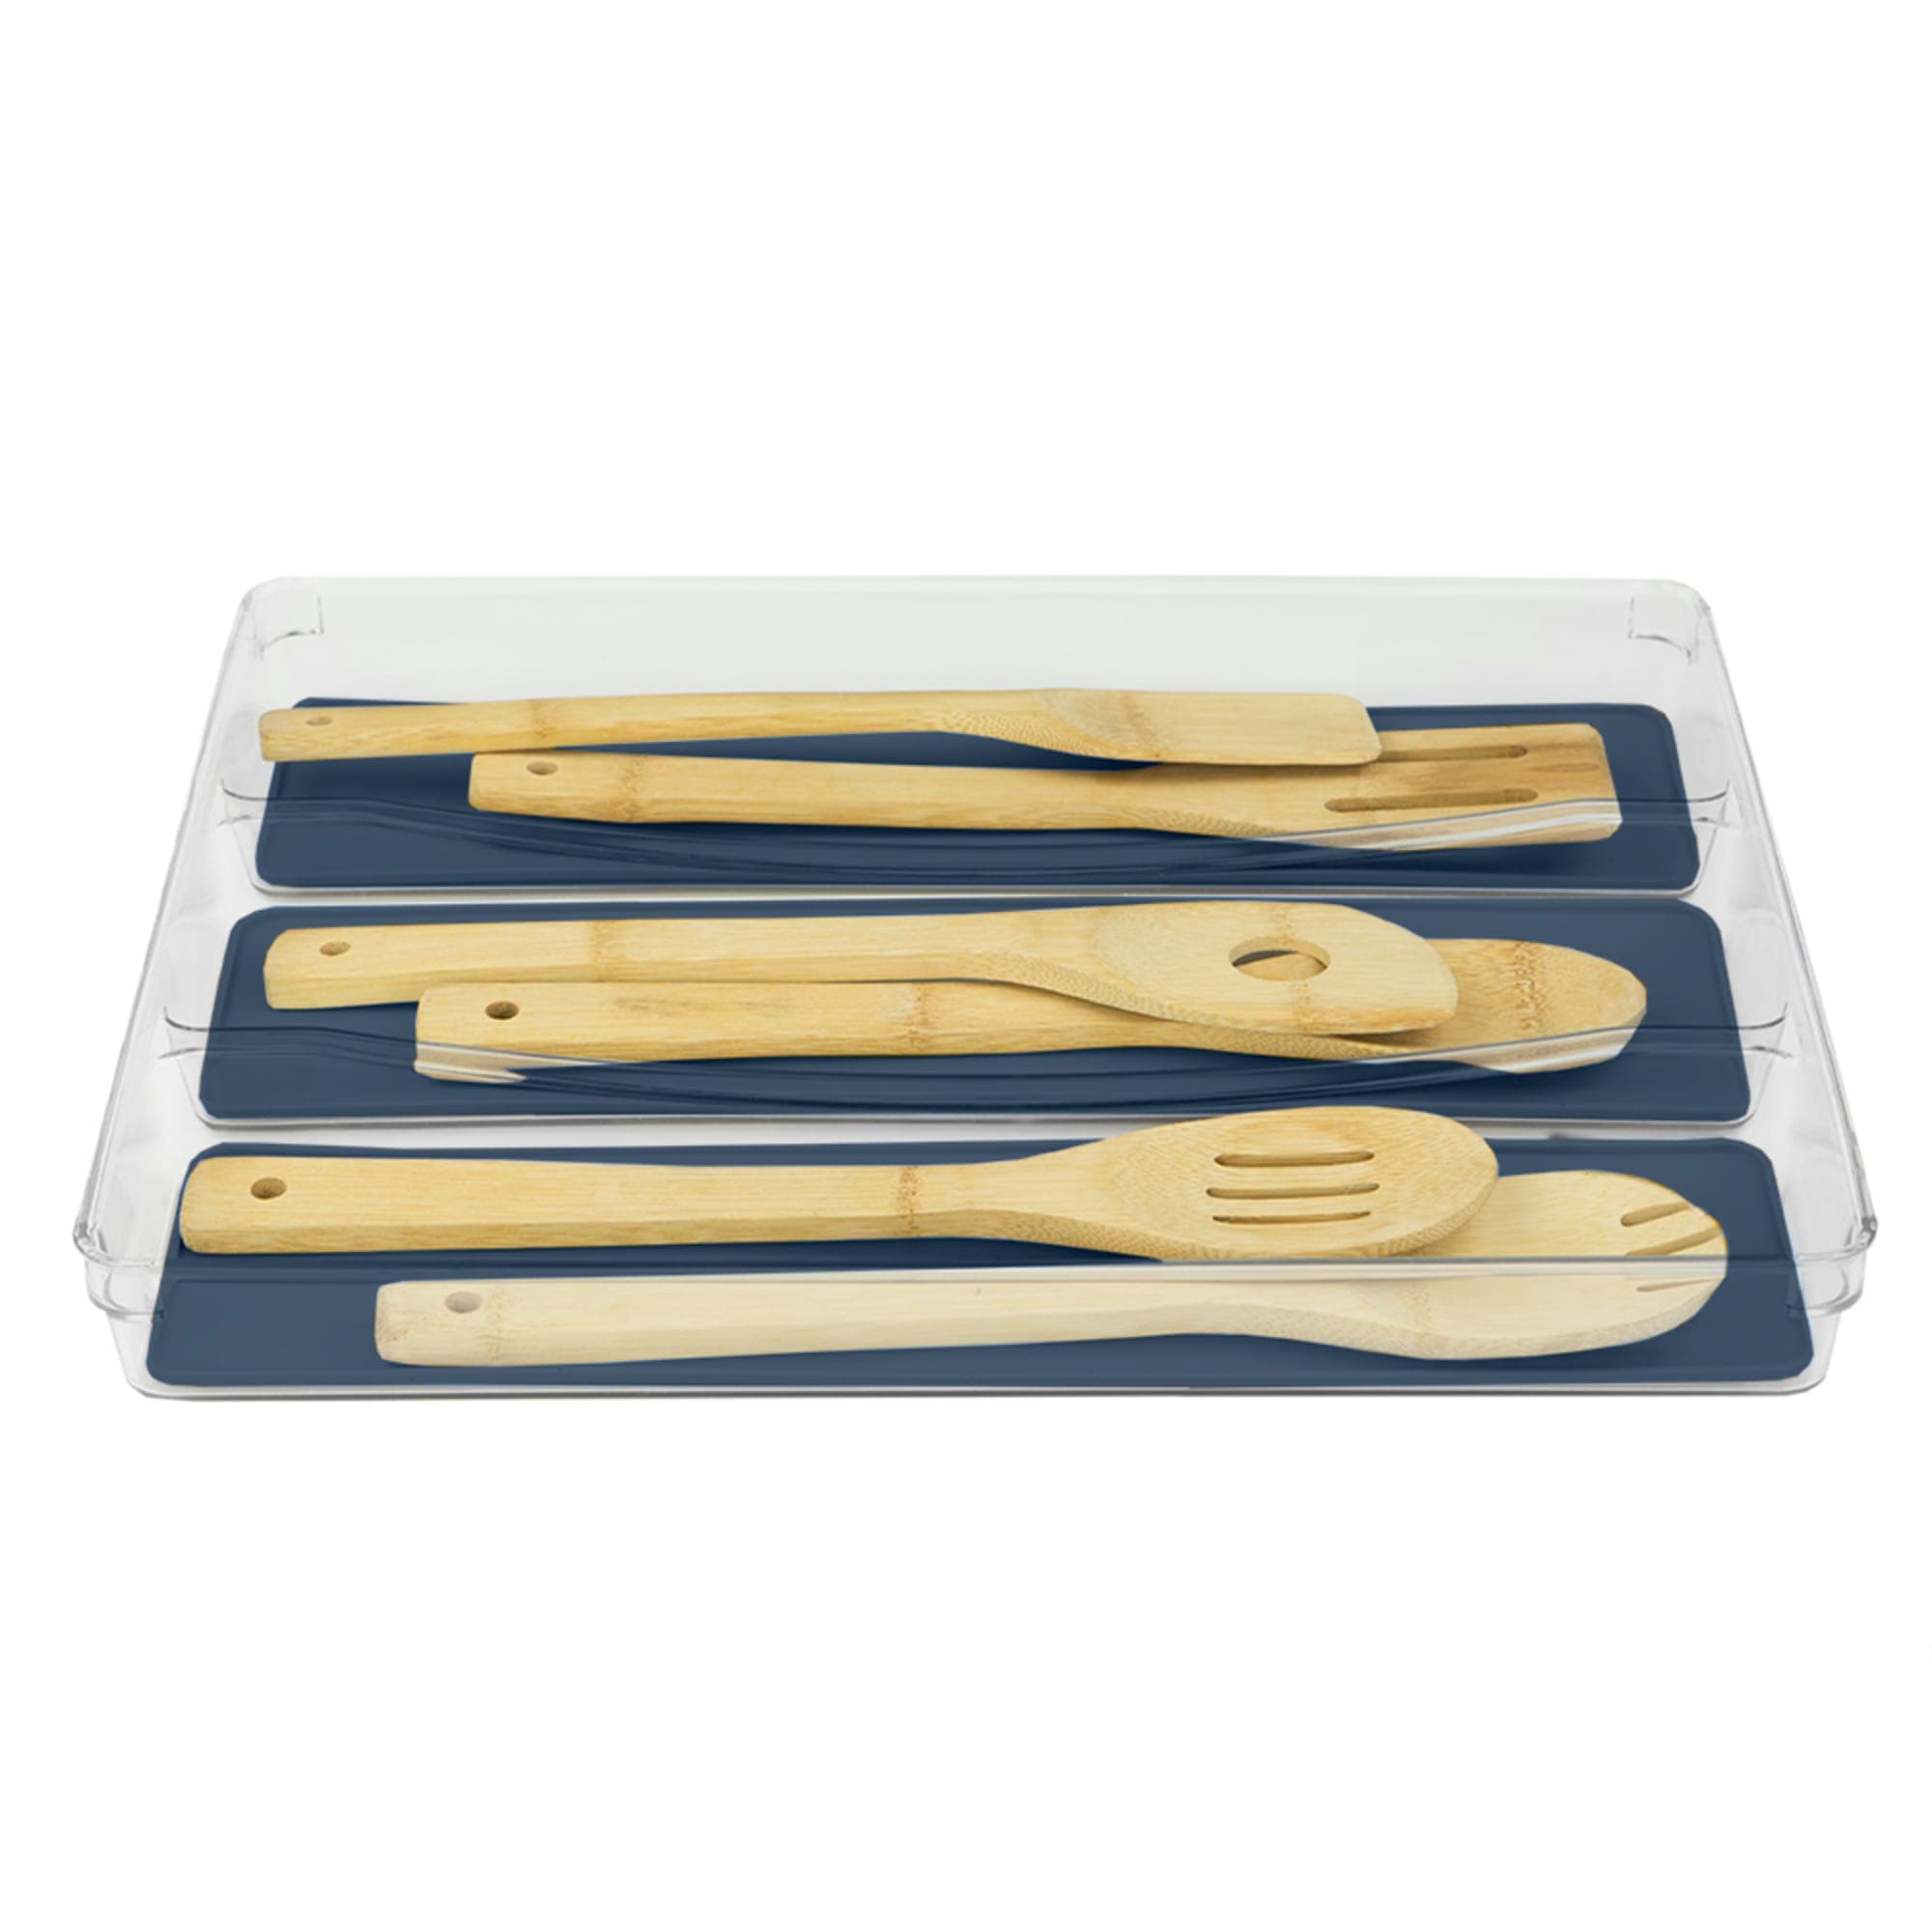 Michael Graves Design X-Large 3 Compartment Rubber Lined Plastic Cutlery Tray, Indigo $10.00 EACH, CASE PACK OF 12